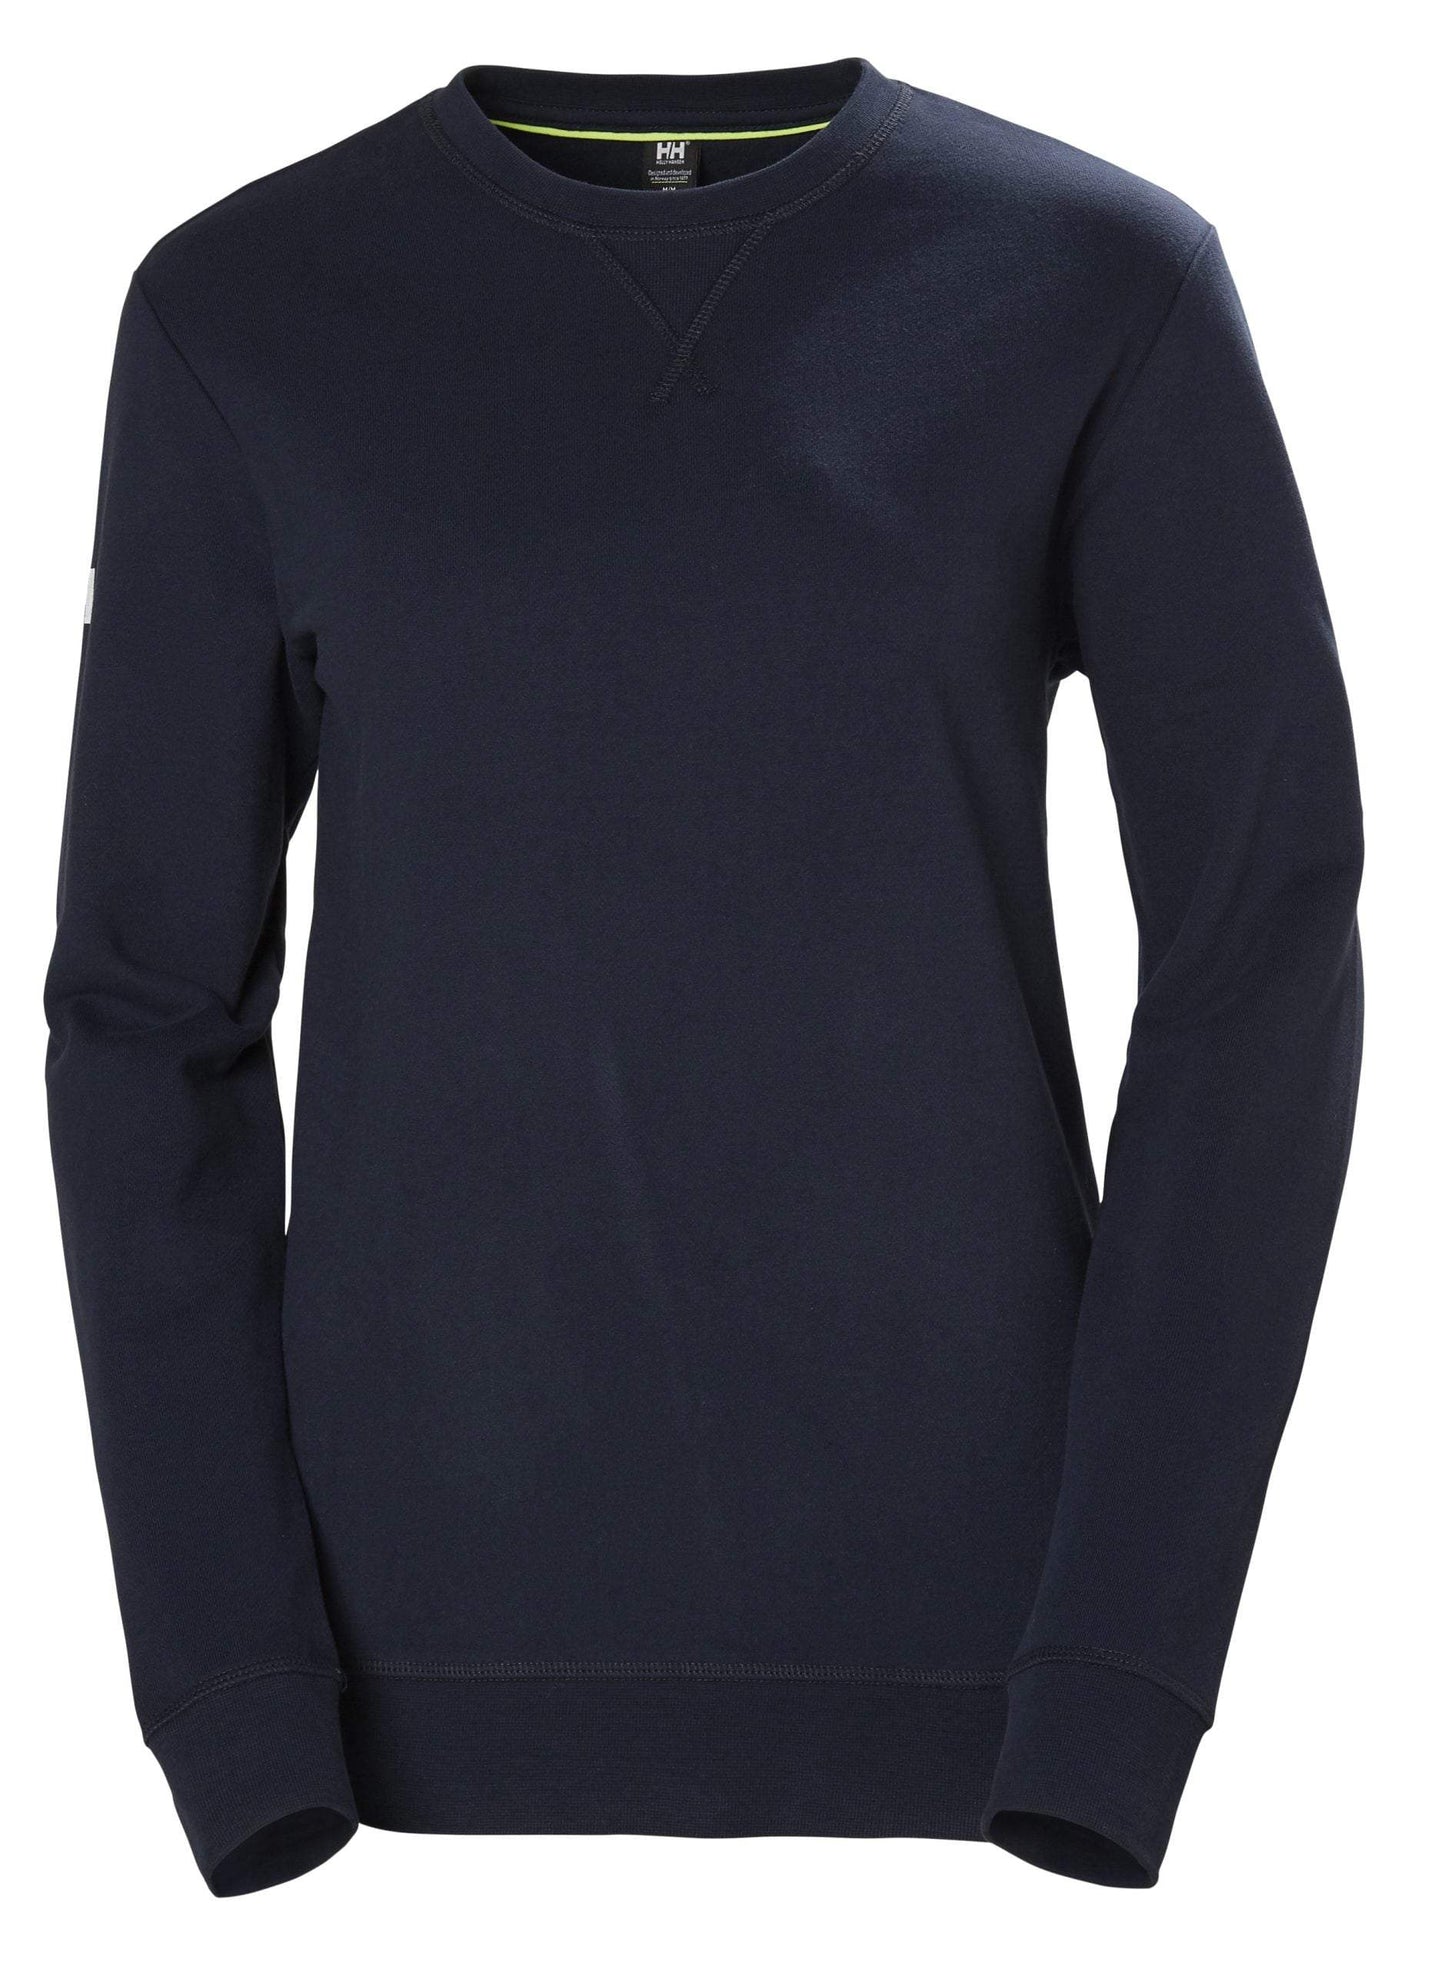 Helly Hansen Women’s Crew Sweatshirt - The Luxury Promotional Gifts Company Limited